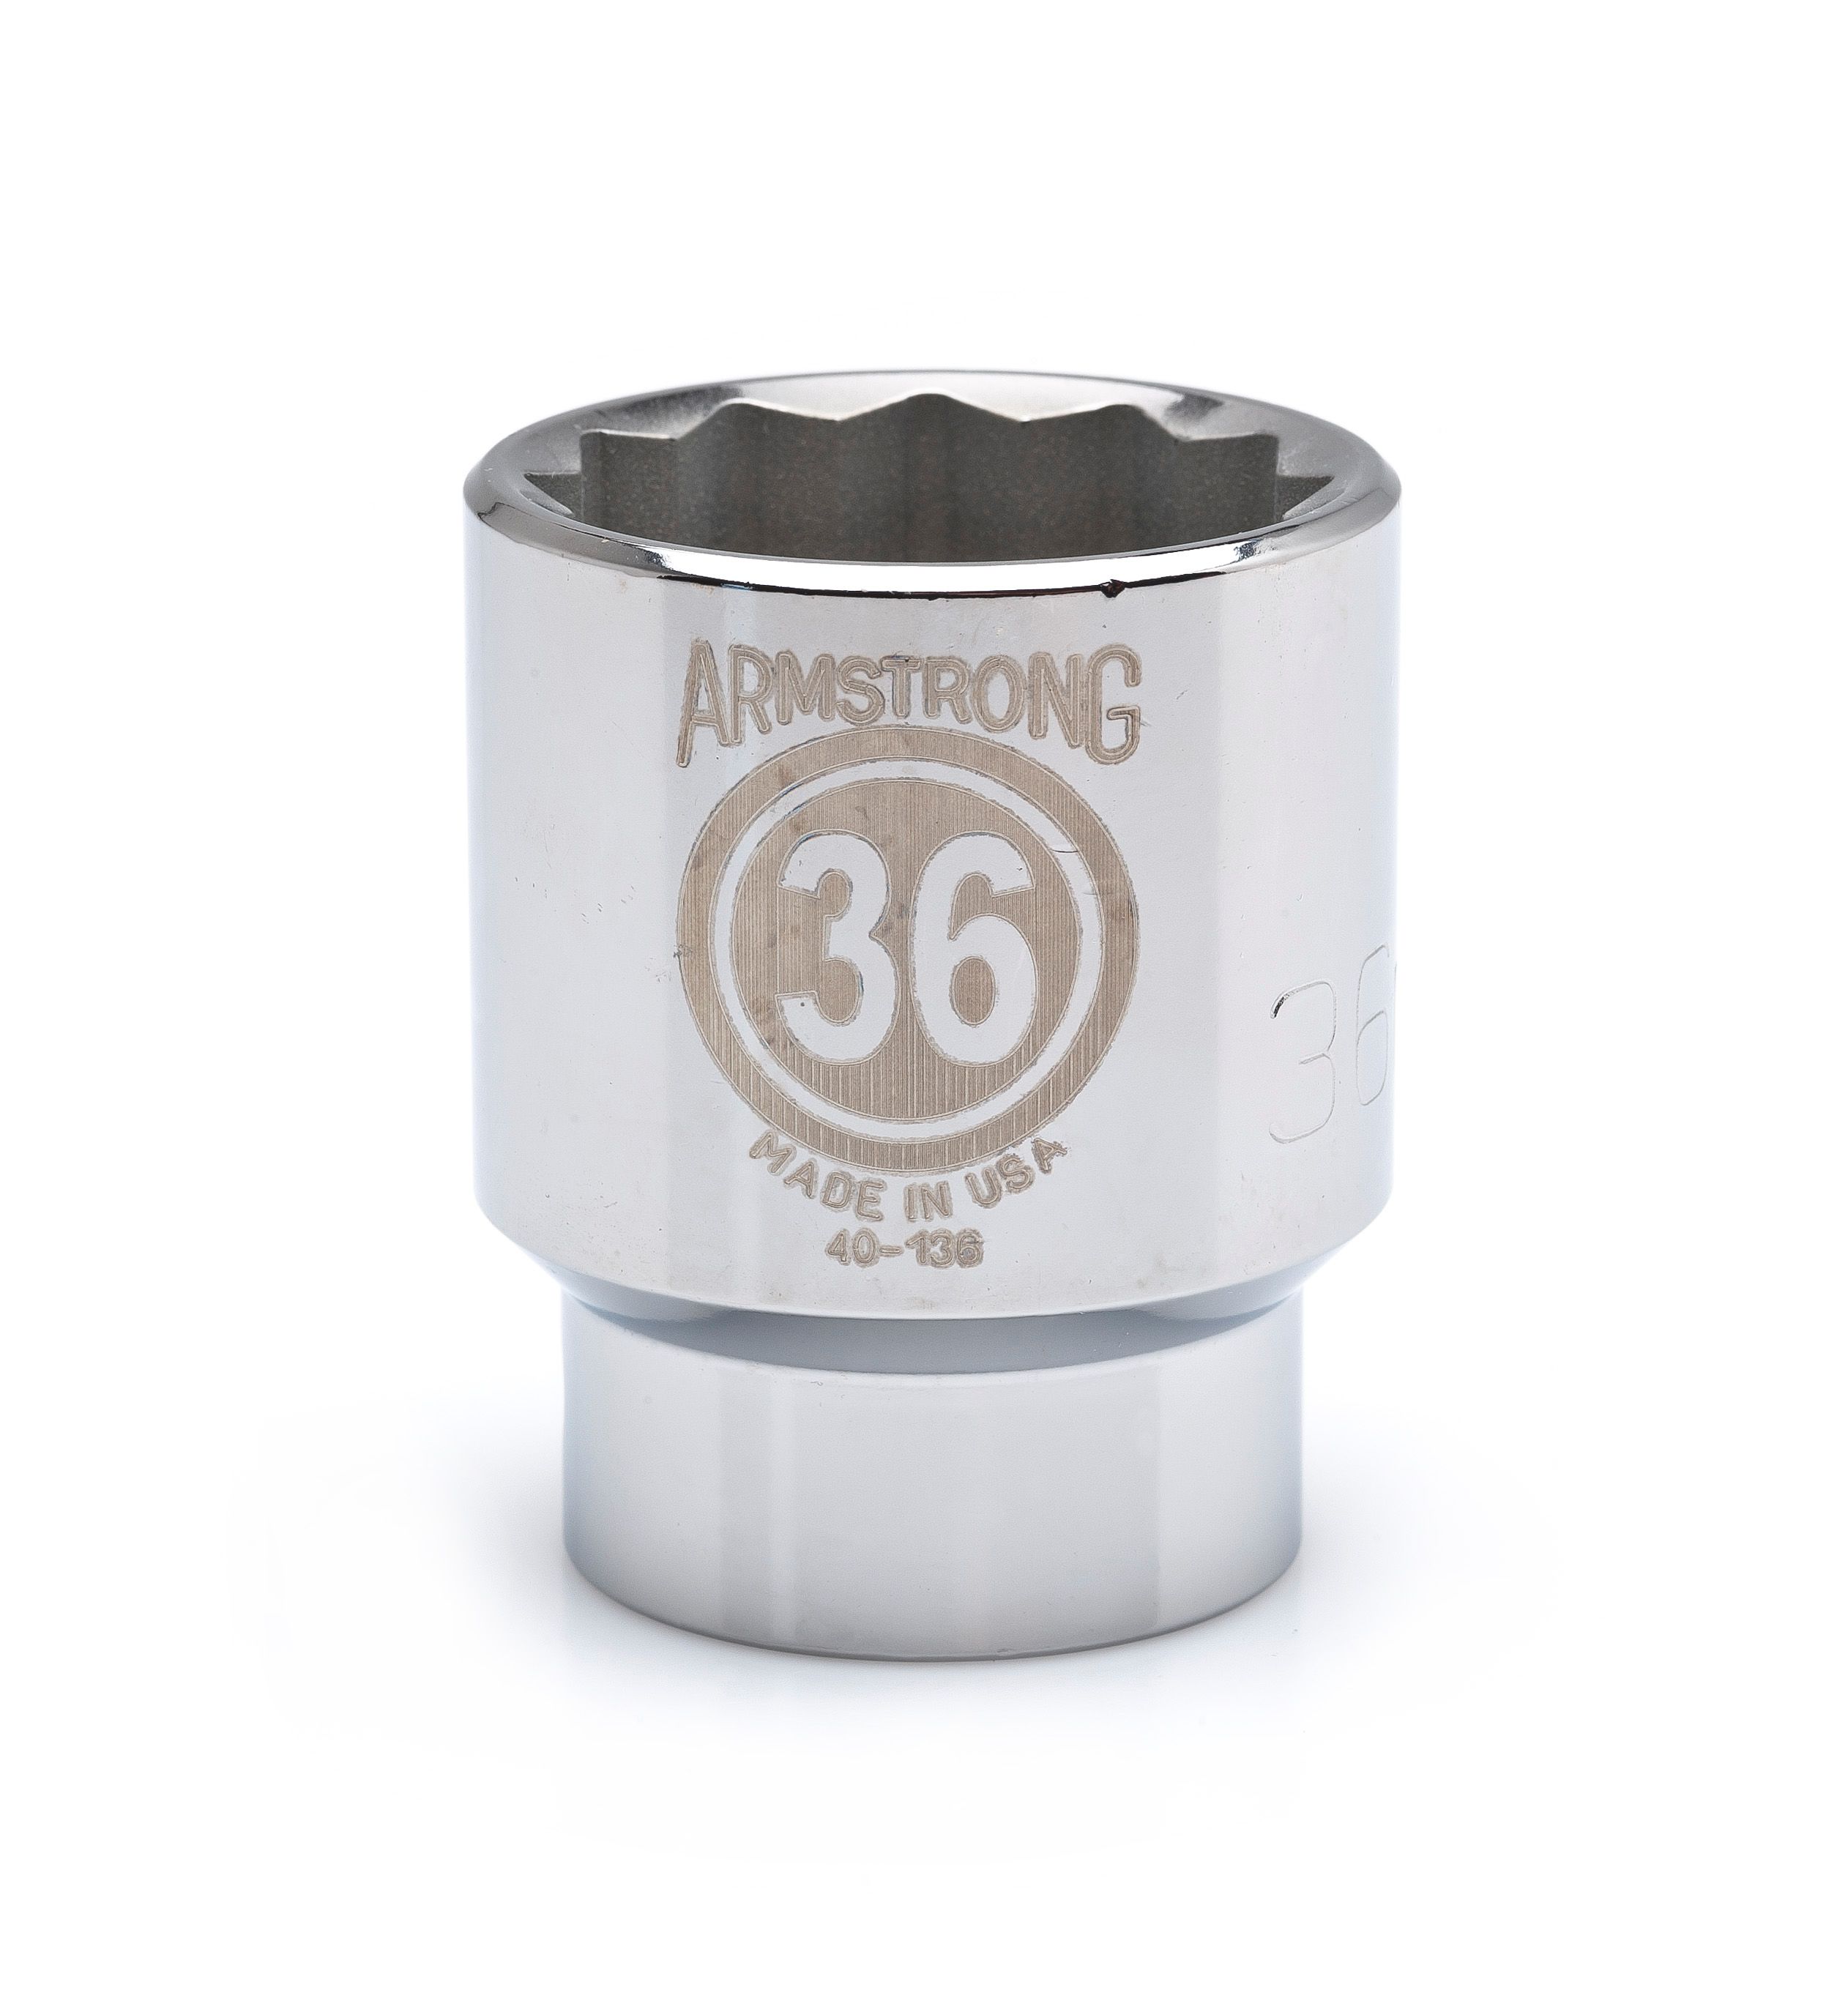 Armstrong Tools 30 mm socket, 12 pt. 3/4 in. drive